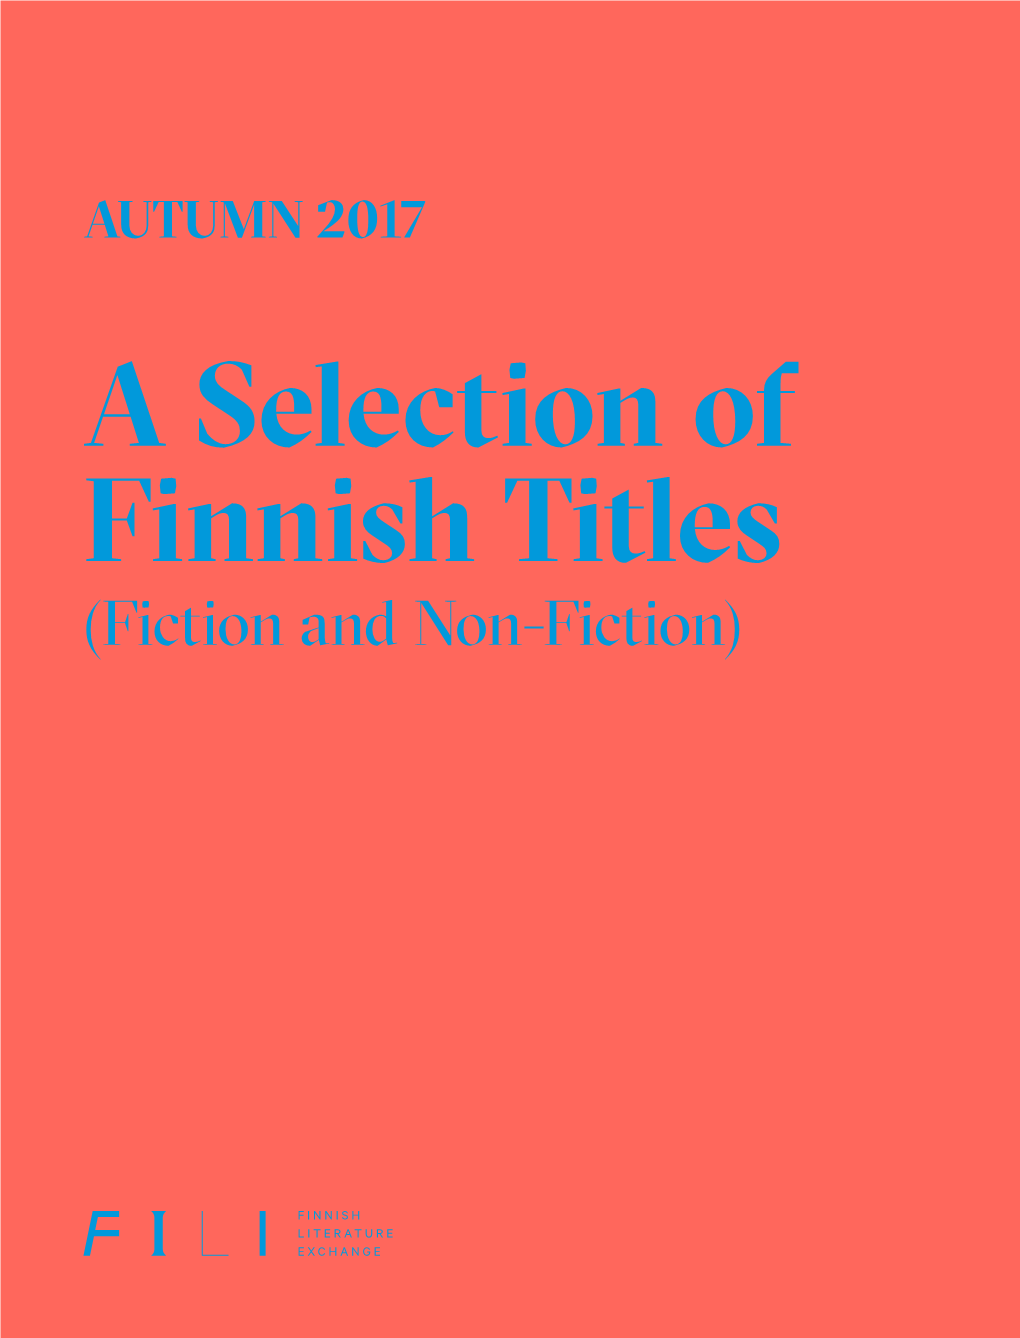 A Selection of Finnish Titles (Fiction and Non-Fiction) 2 3